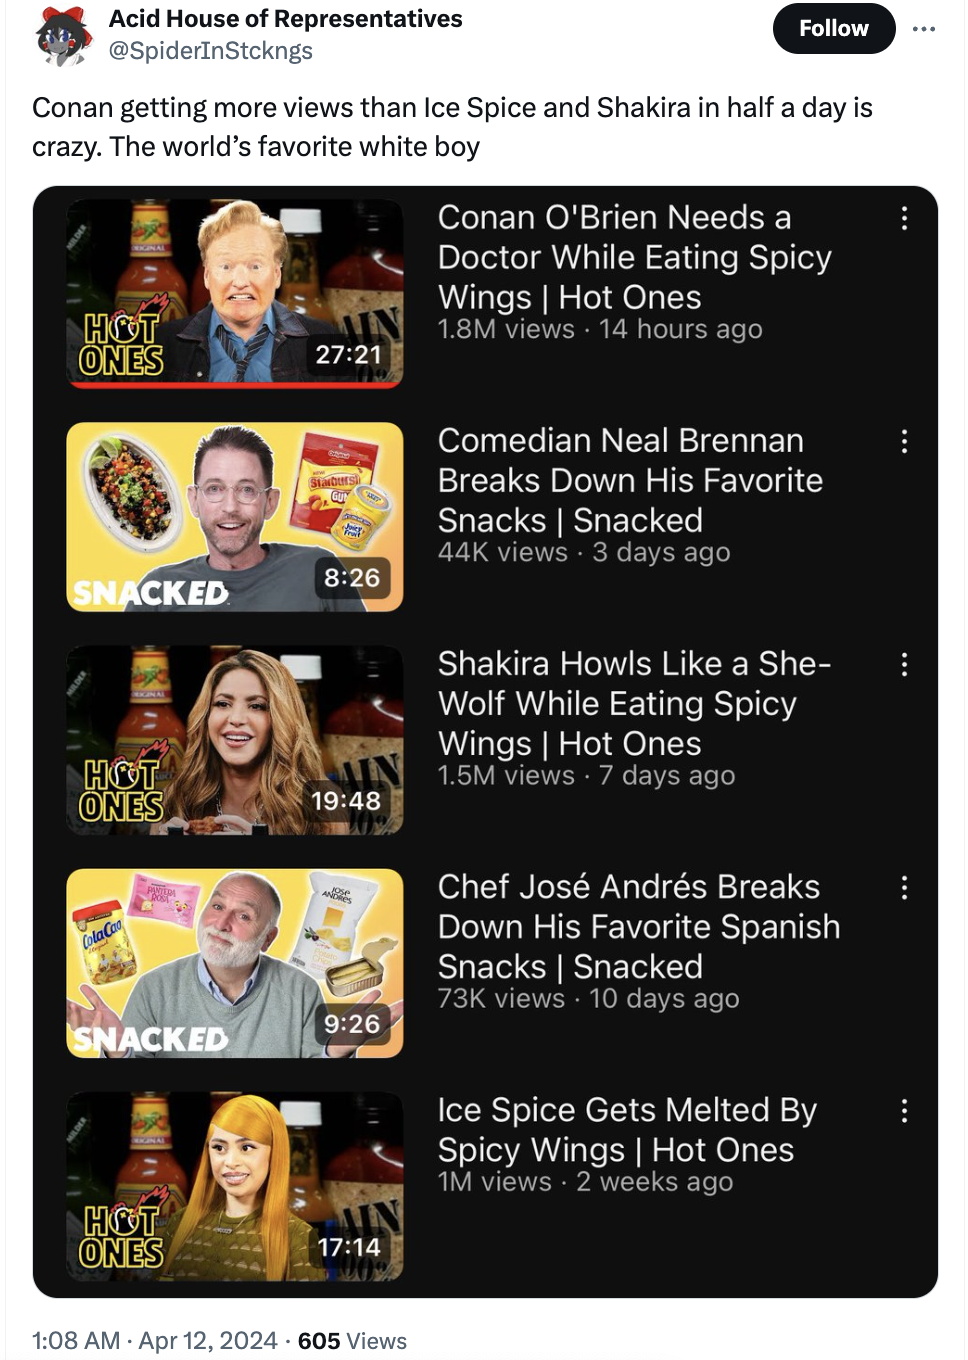 screenshot - Acid House of Representatives Conan getting more views than Ice Spice and Shakira in half a day is crazy. The world's favorite white boy Hot Ones Snacked Hot Ones Conan O'Brien Needs a Doctor While Eating Spicy Wings | Hot Ones 1.8M views 14 